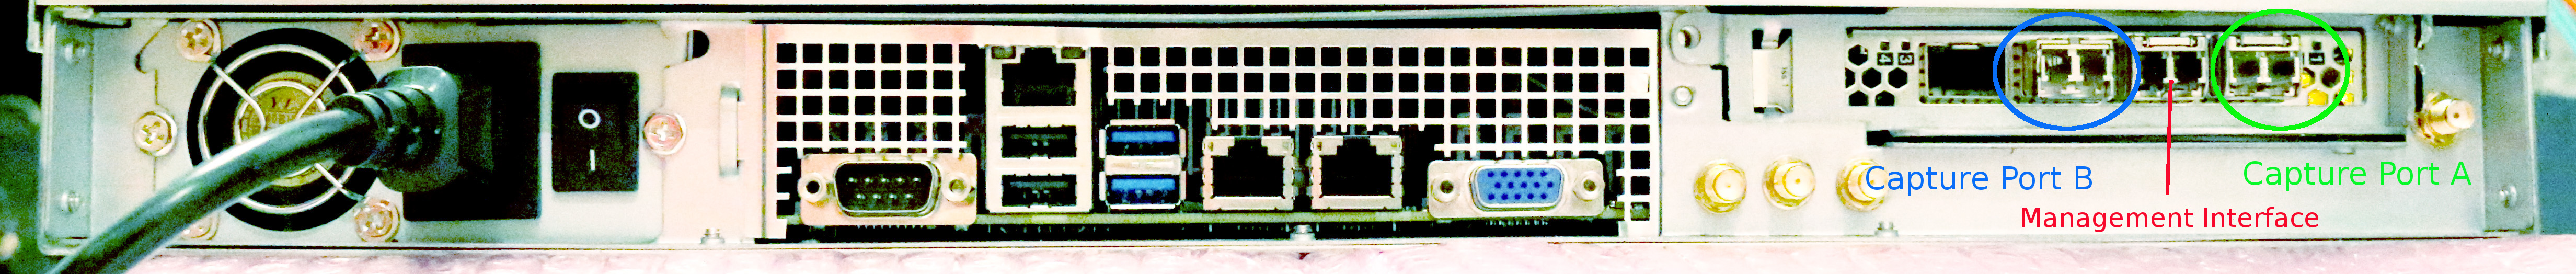 20g packet capture rear port interfaces